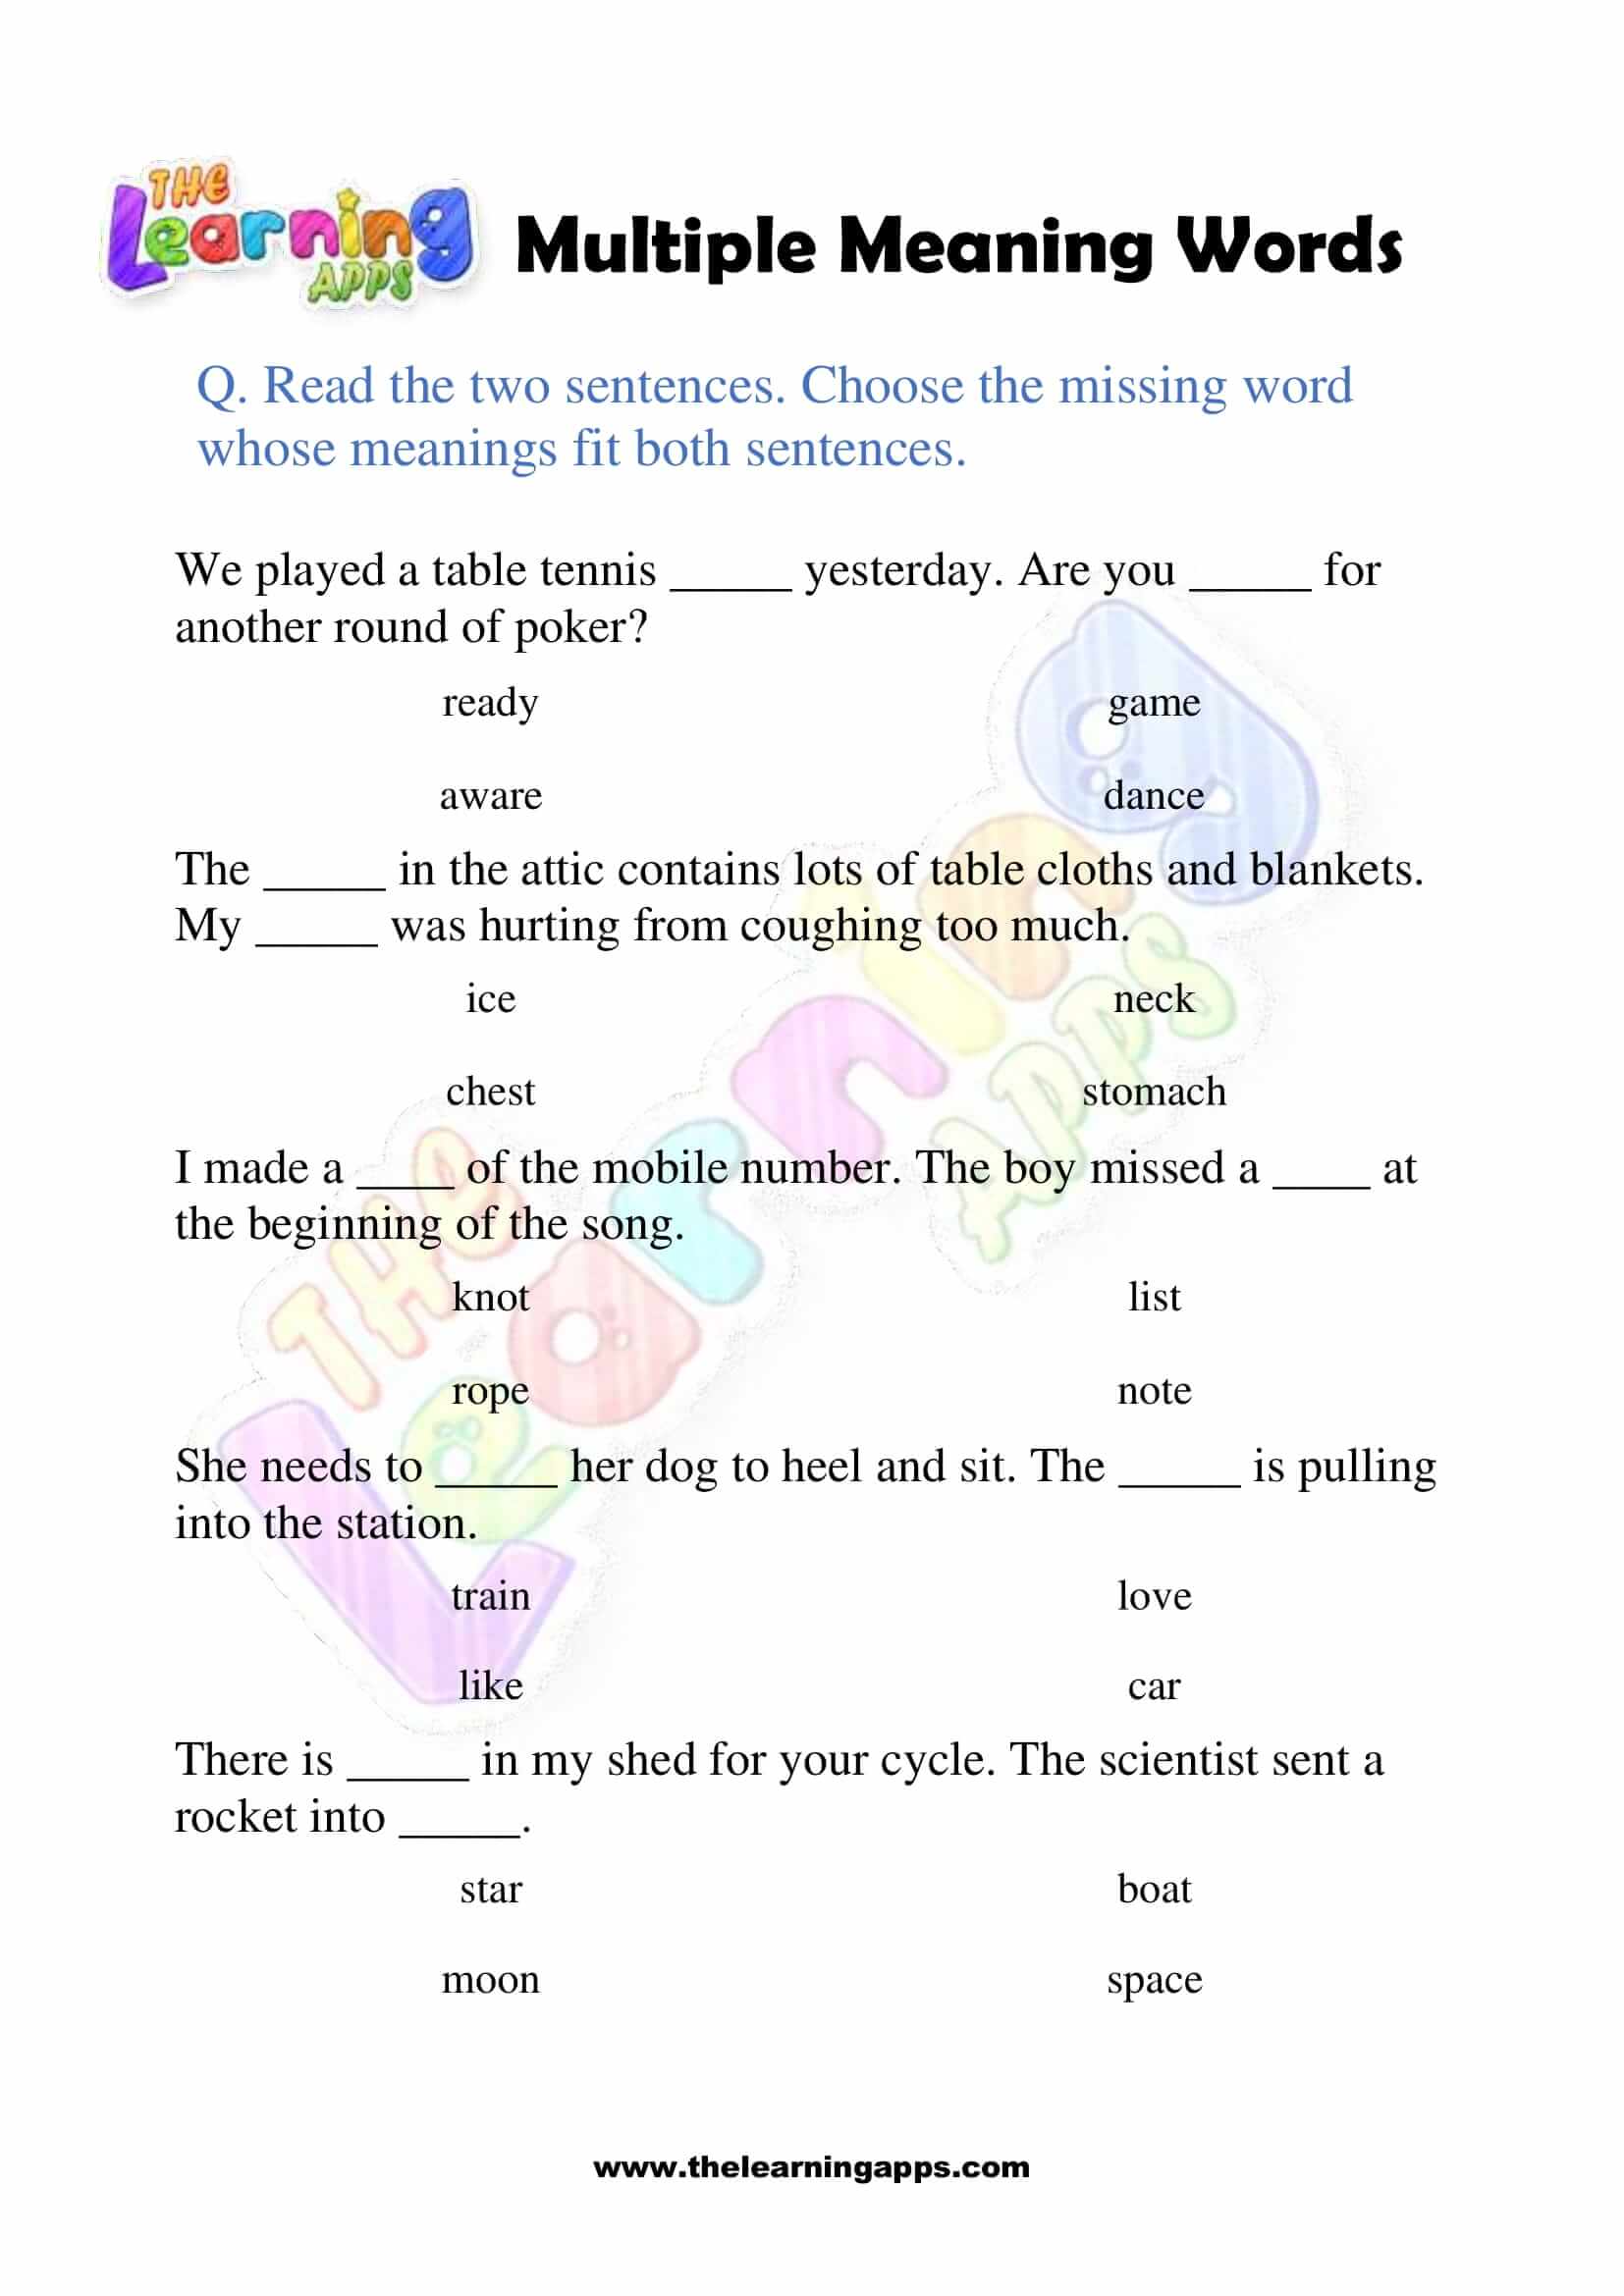 Multiple Meaning Words - Grade 3 - Activity 3